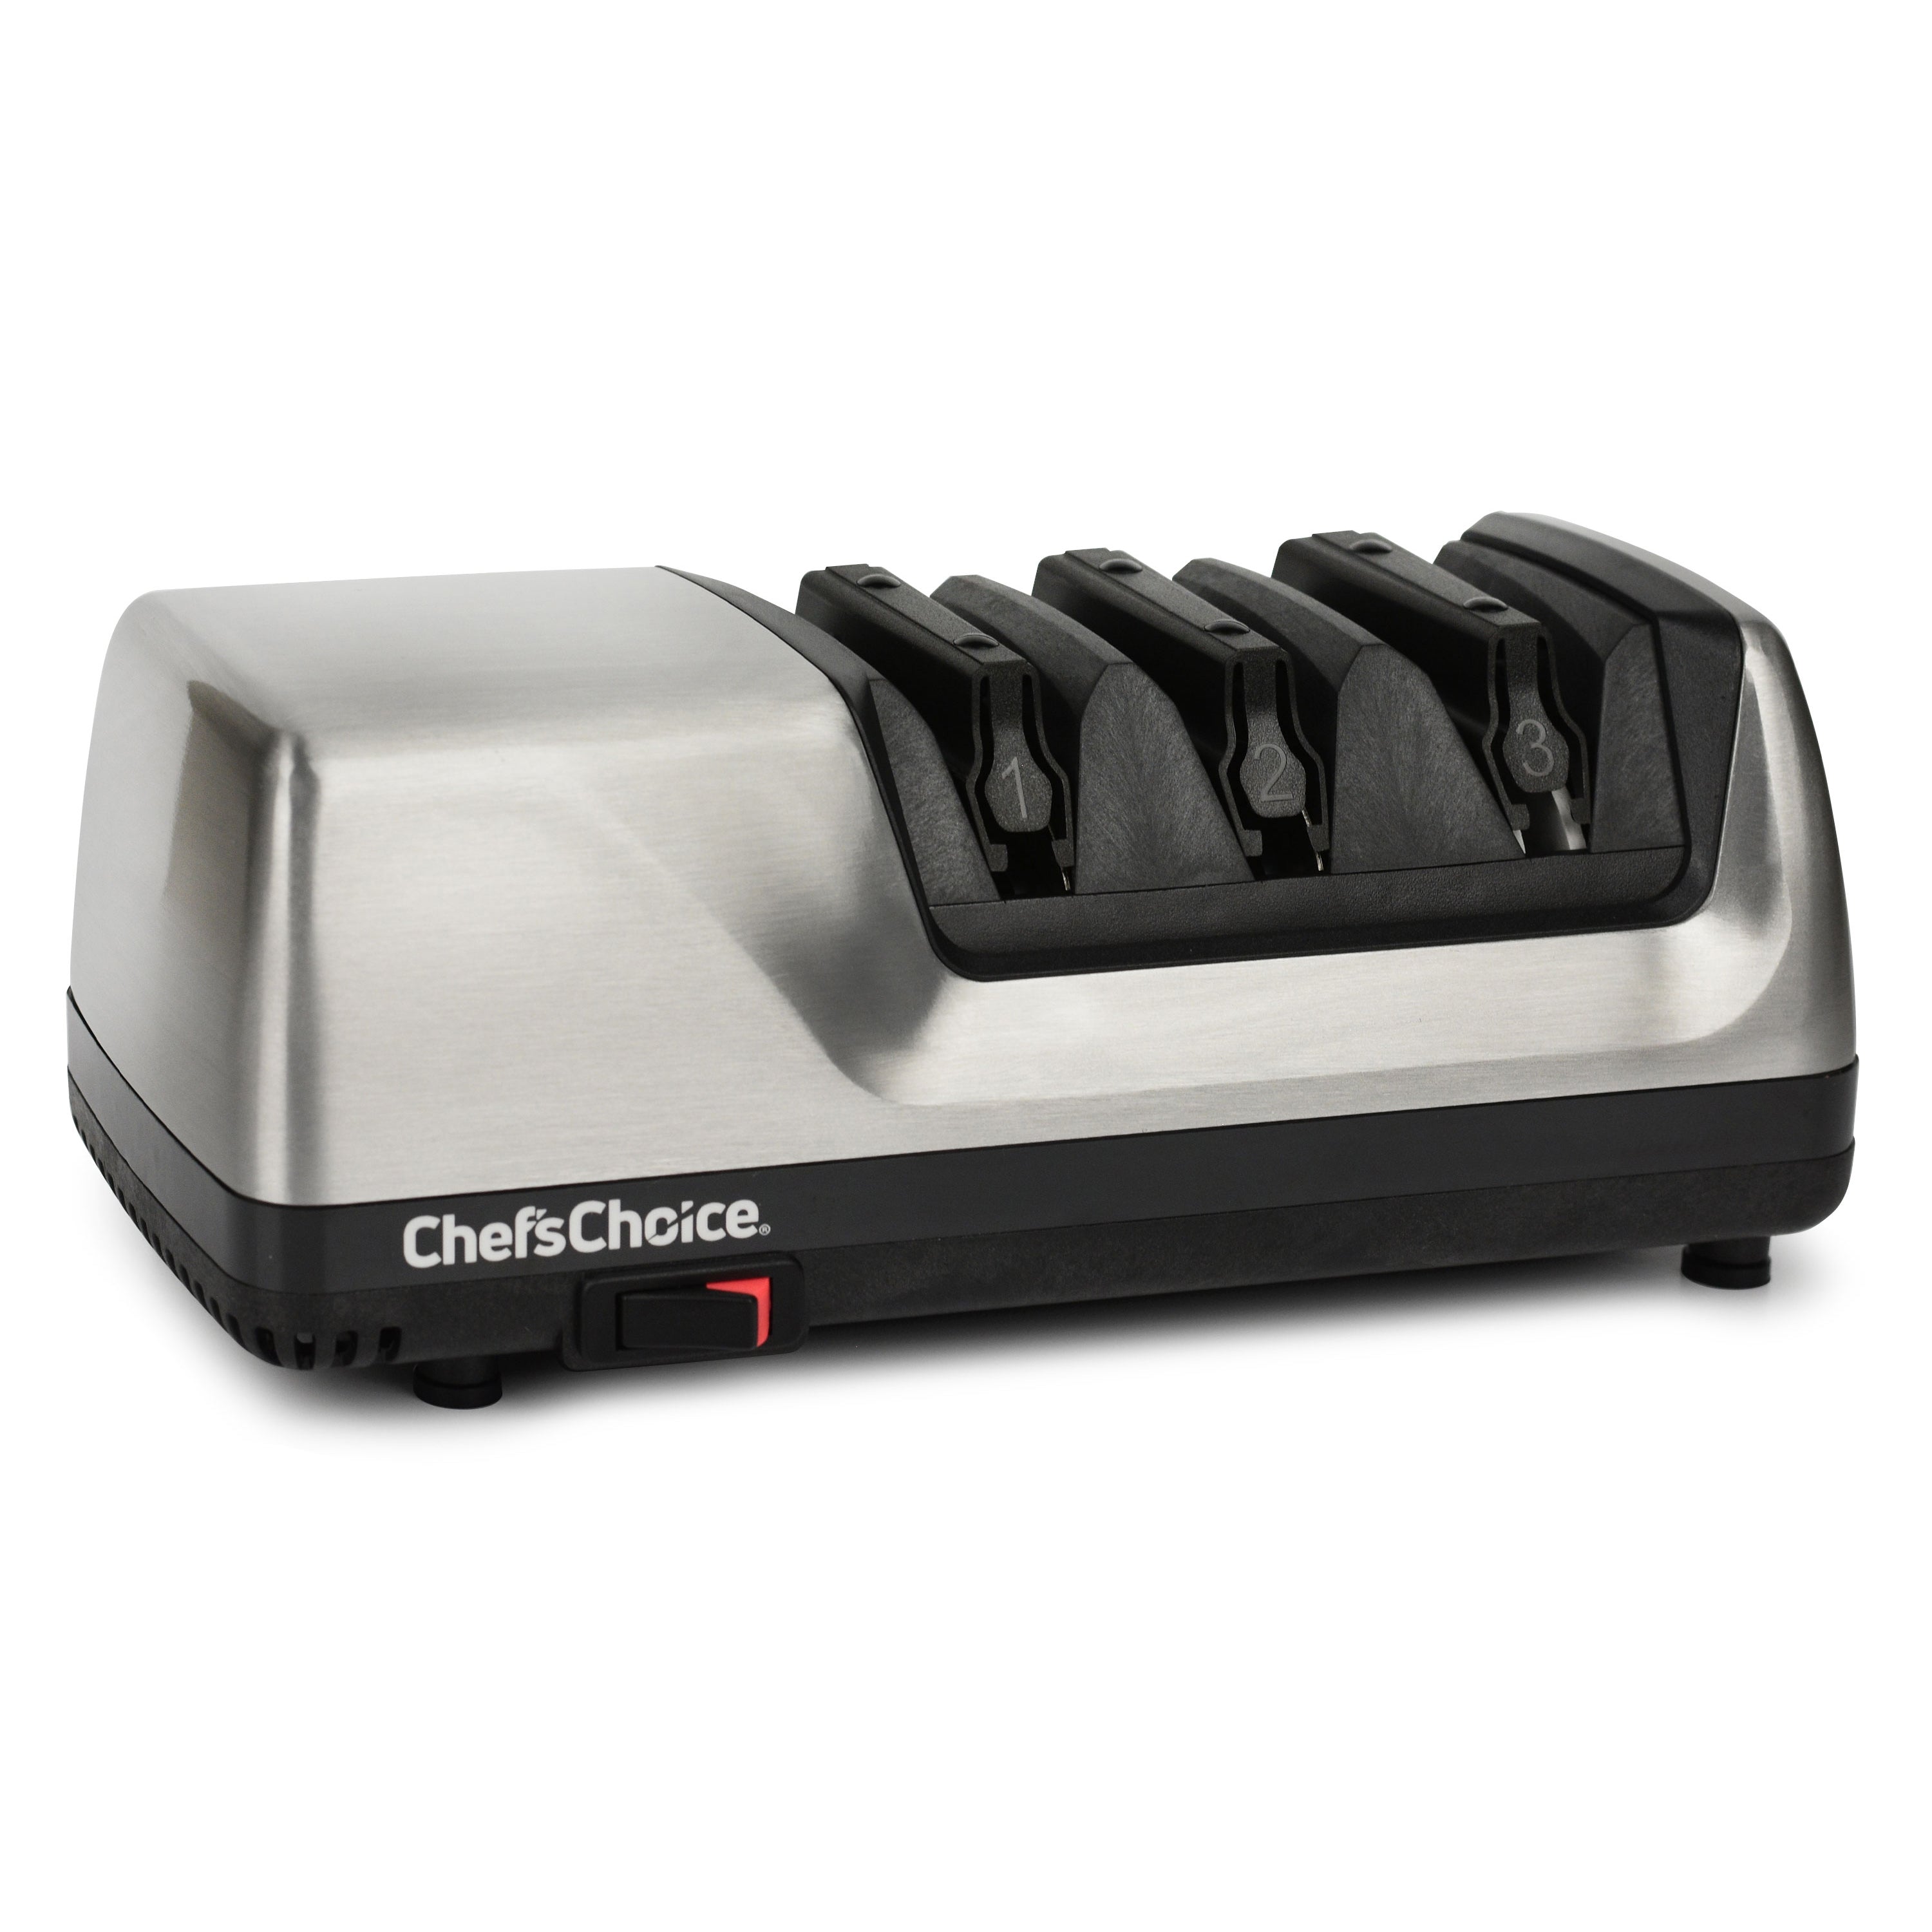 Chef's Choice Trizor 15XV Review: The Ultimate Electric Kitchen